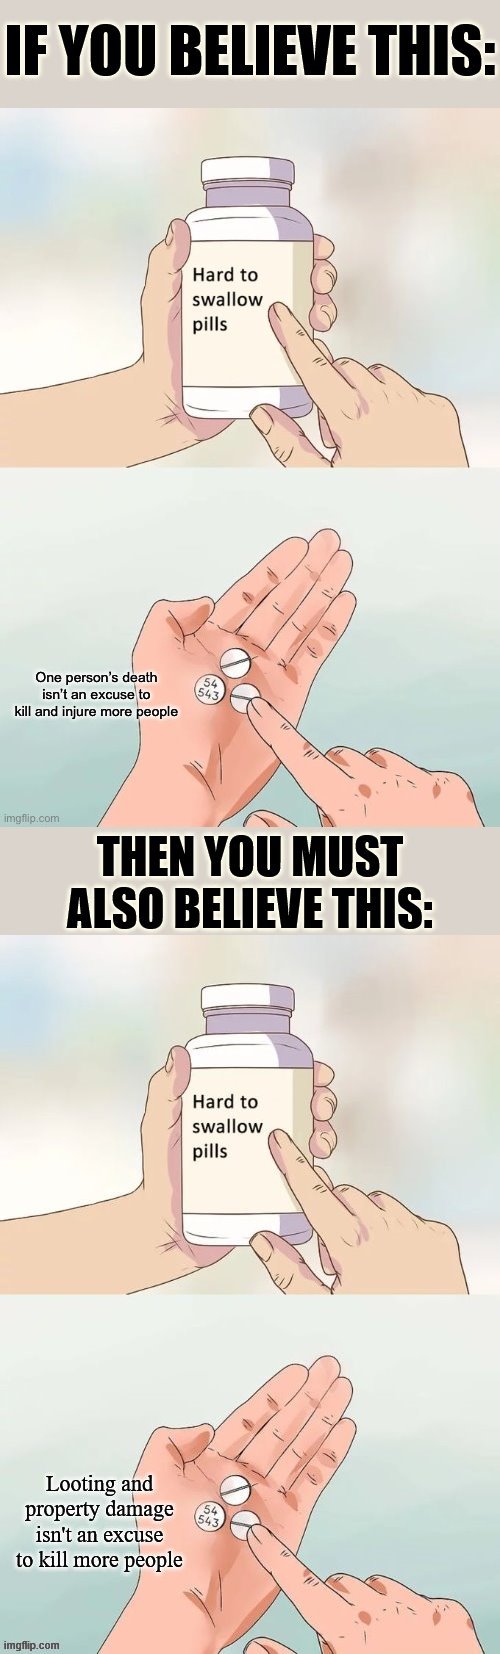 How do we put an end to violence? By putting an end to violence. | image tagged in violence is never the answer,violence,police brutality,riots,riot,hard to swallow pills | made w/ Imgflip meme maker